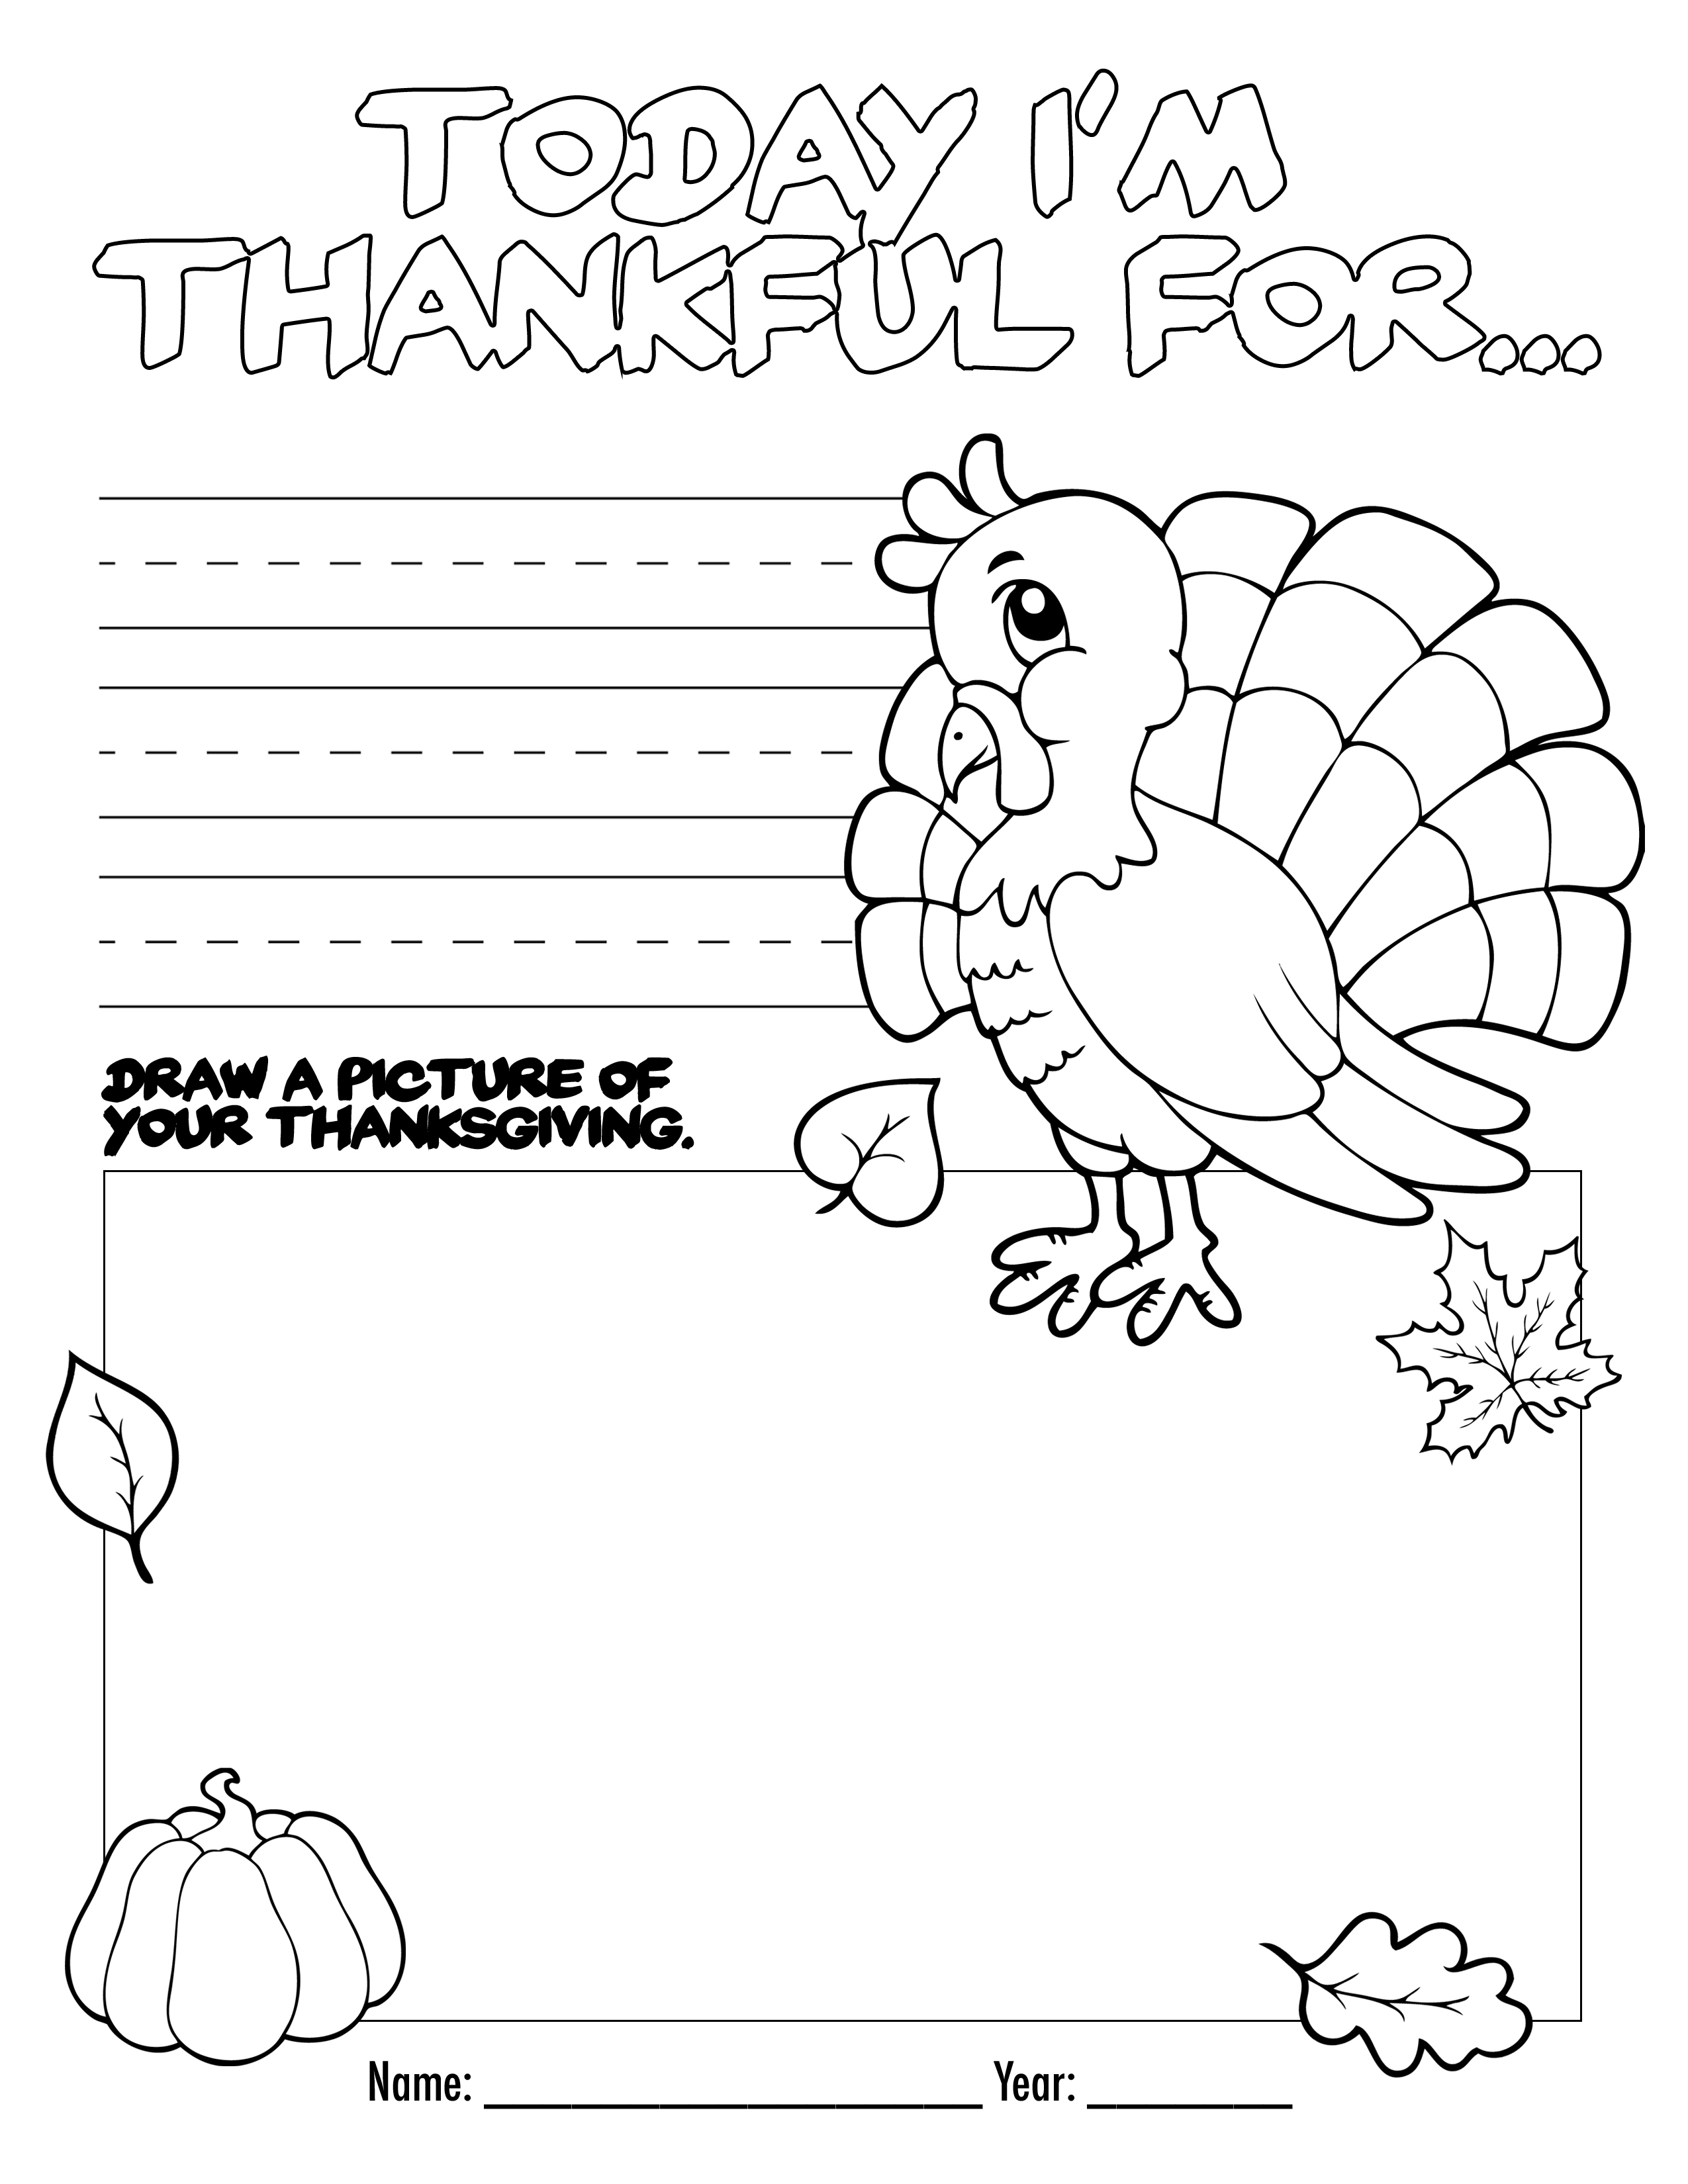 Thanksgiving Coloring Book Free Printable For The Kids! - Free Printable Thanksgiving Worksheets